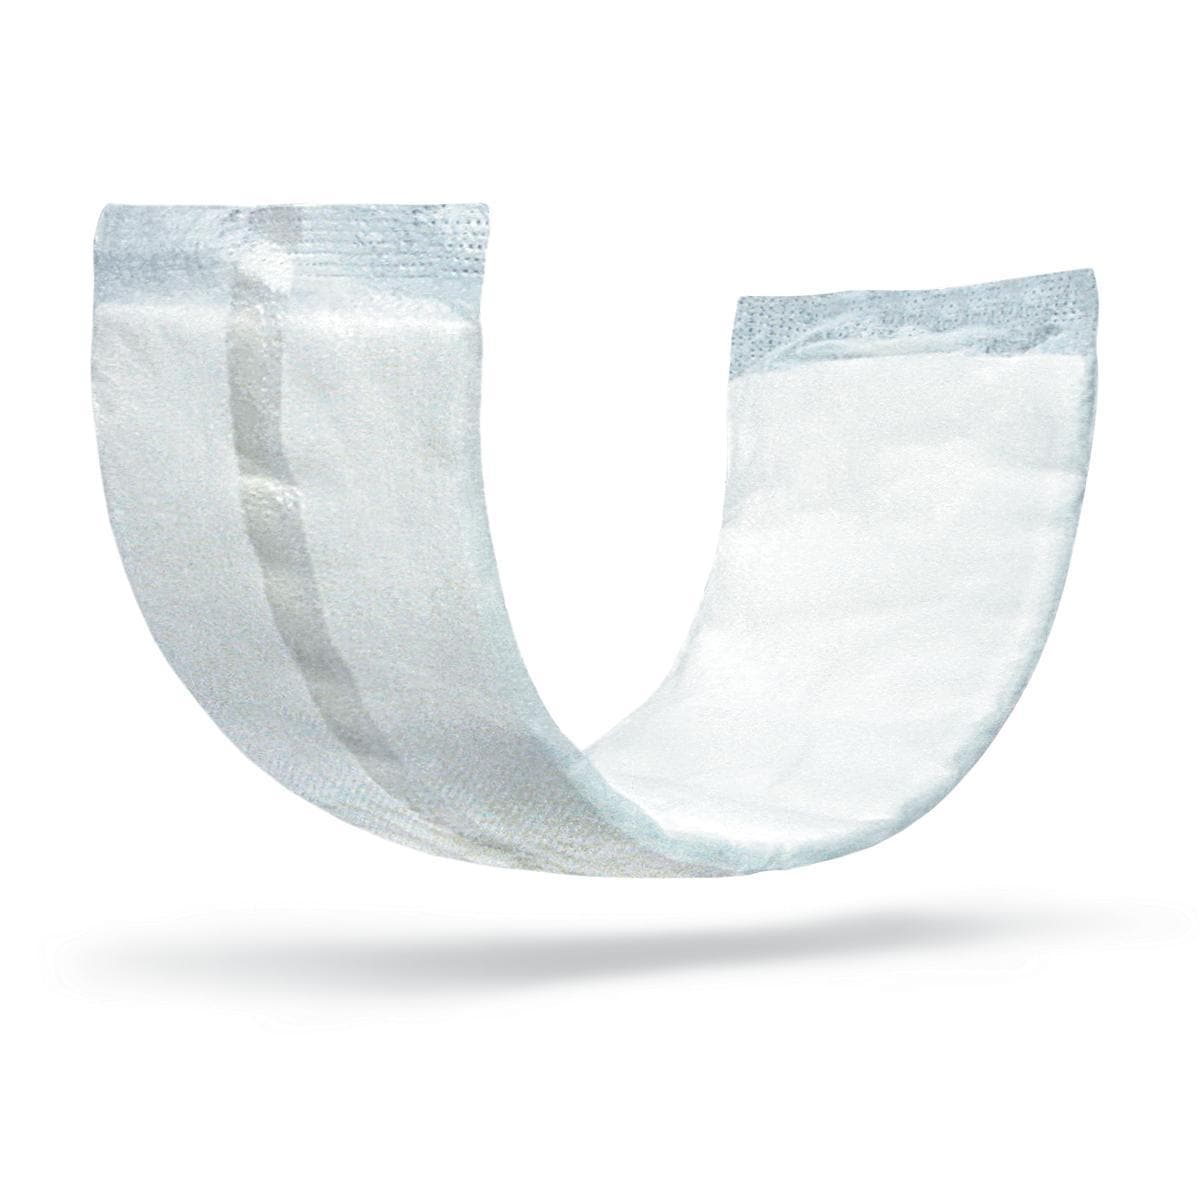 FitRight Double Up Thin Incontinence Booster Pads - Case of 192 Pads - Senior.com Bosster Pads